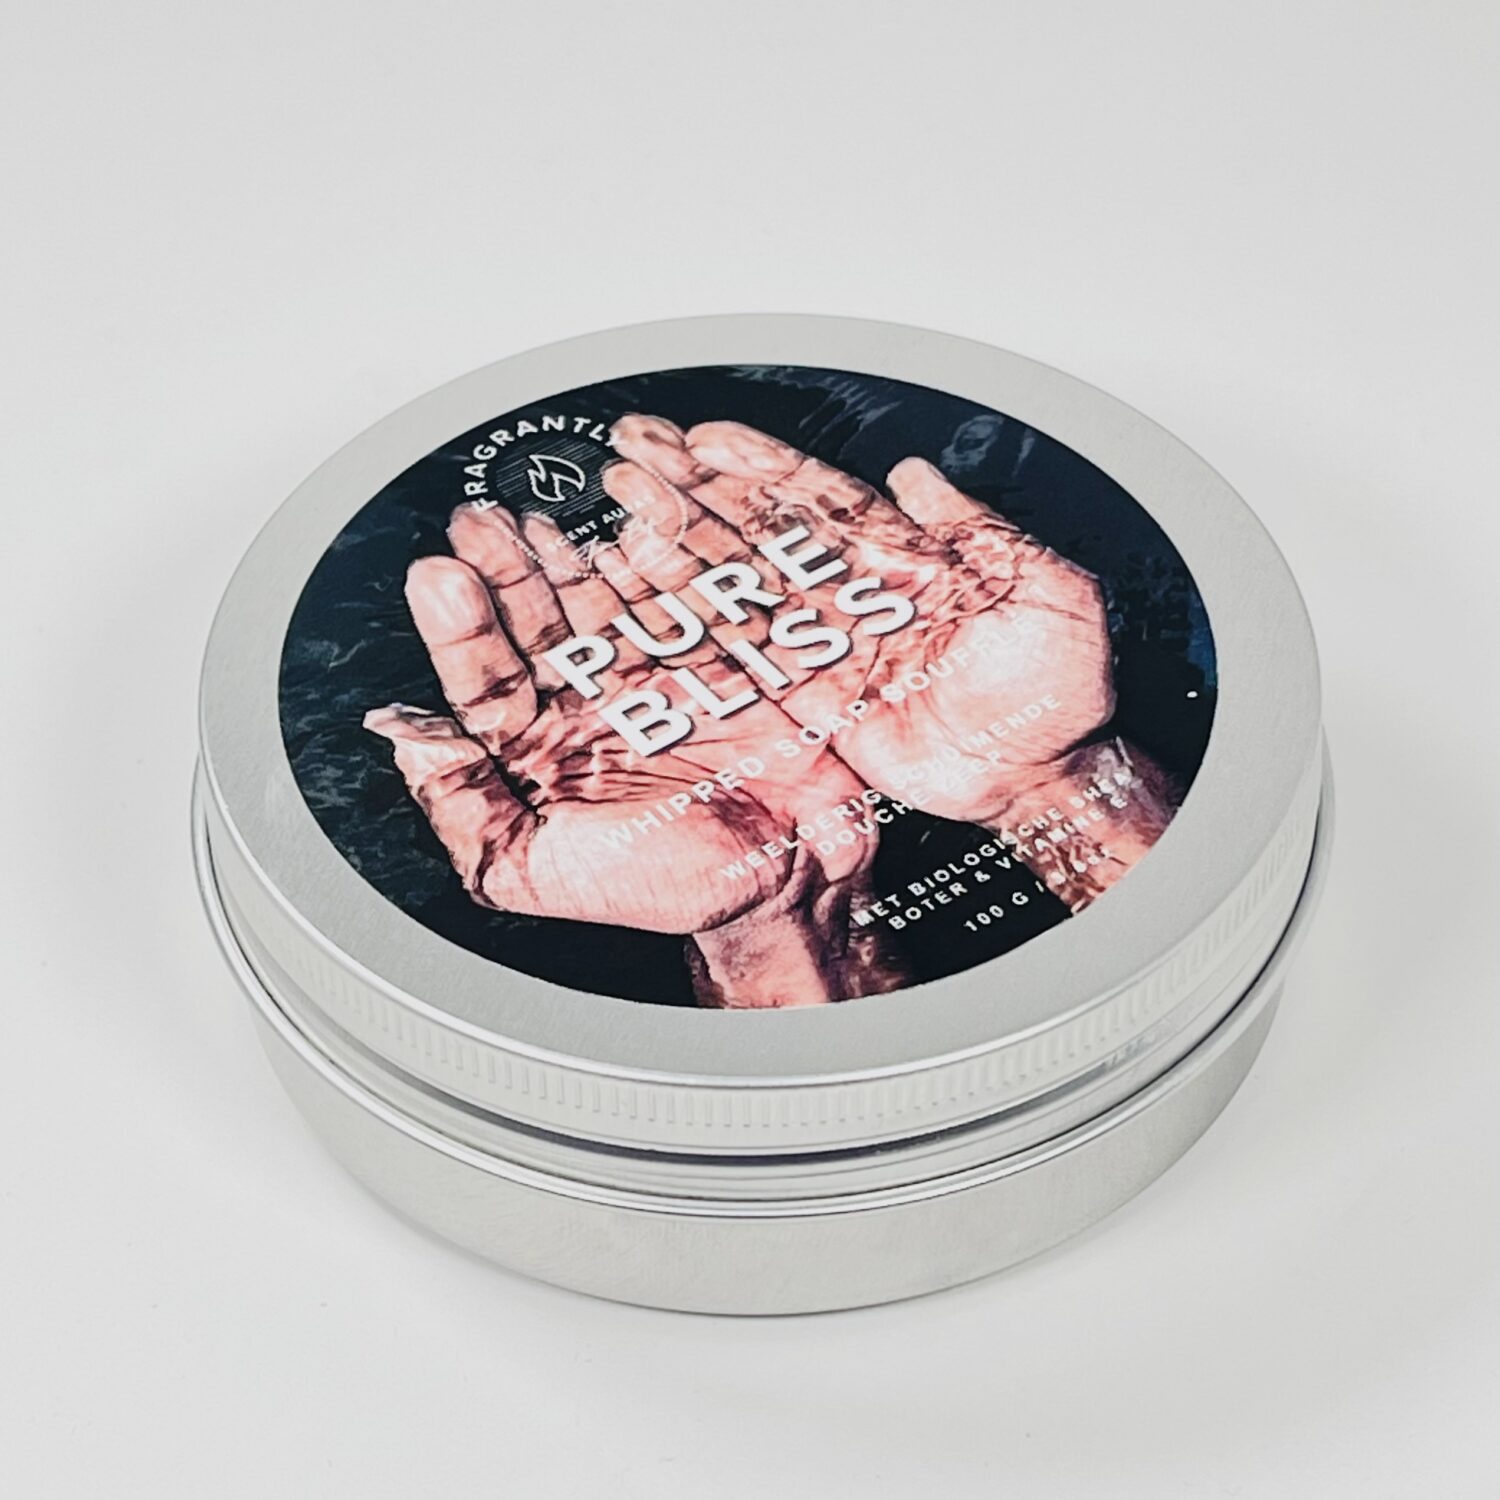 Fragrantly Pure Bliss whipped soap souffle in blik